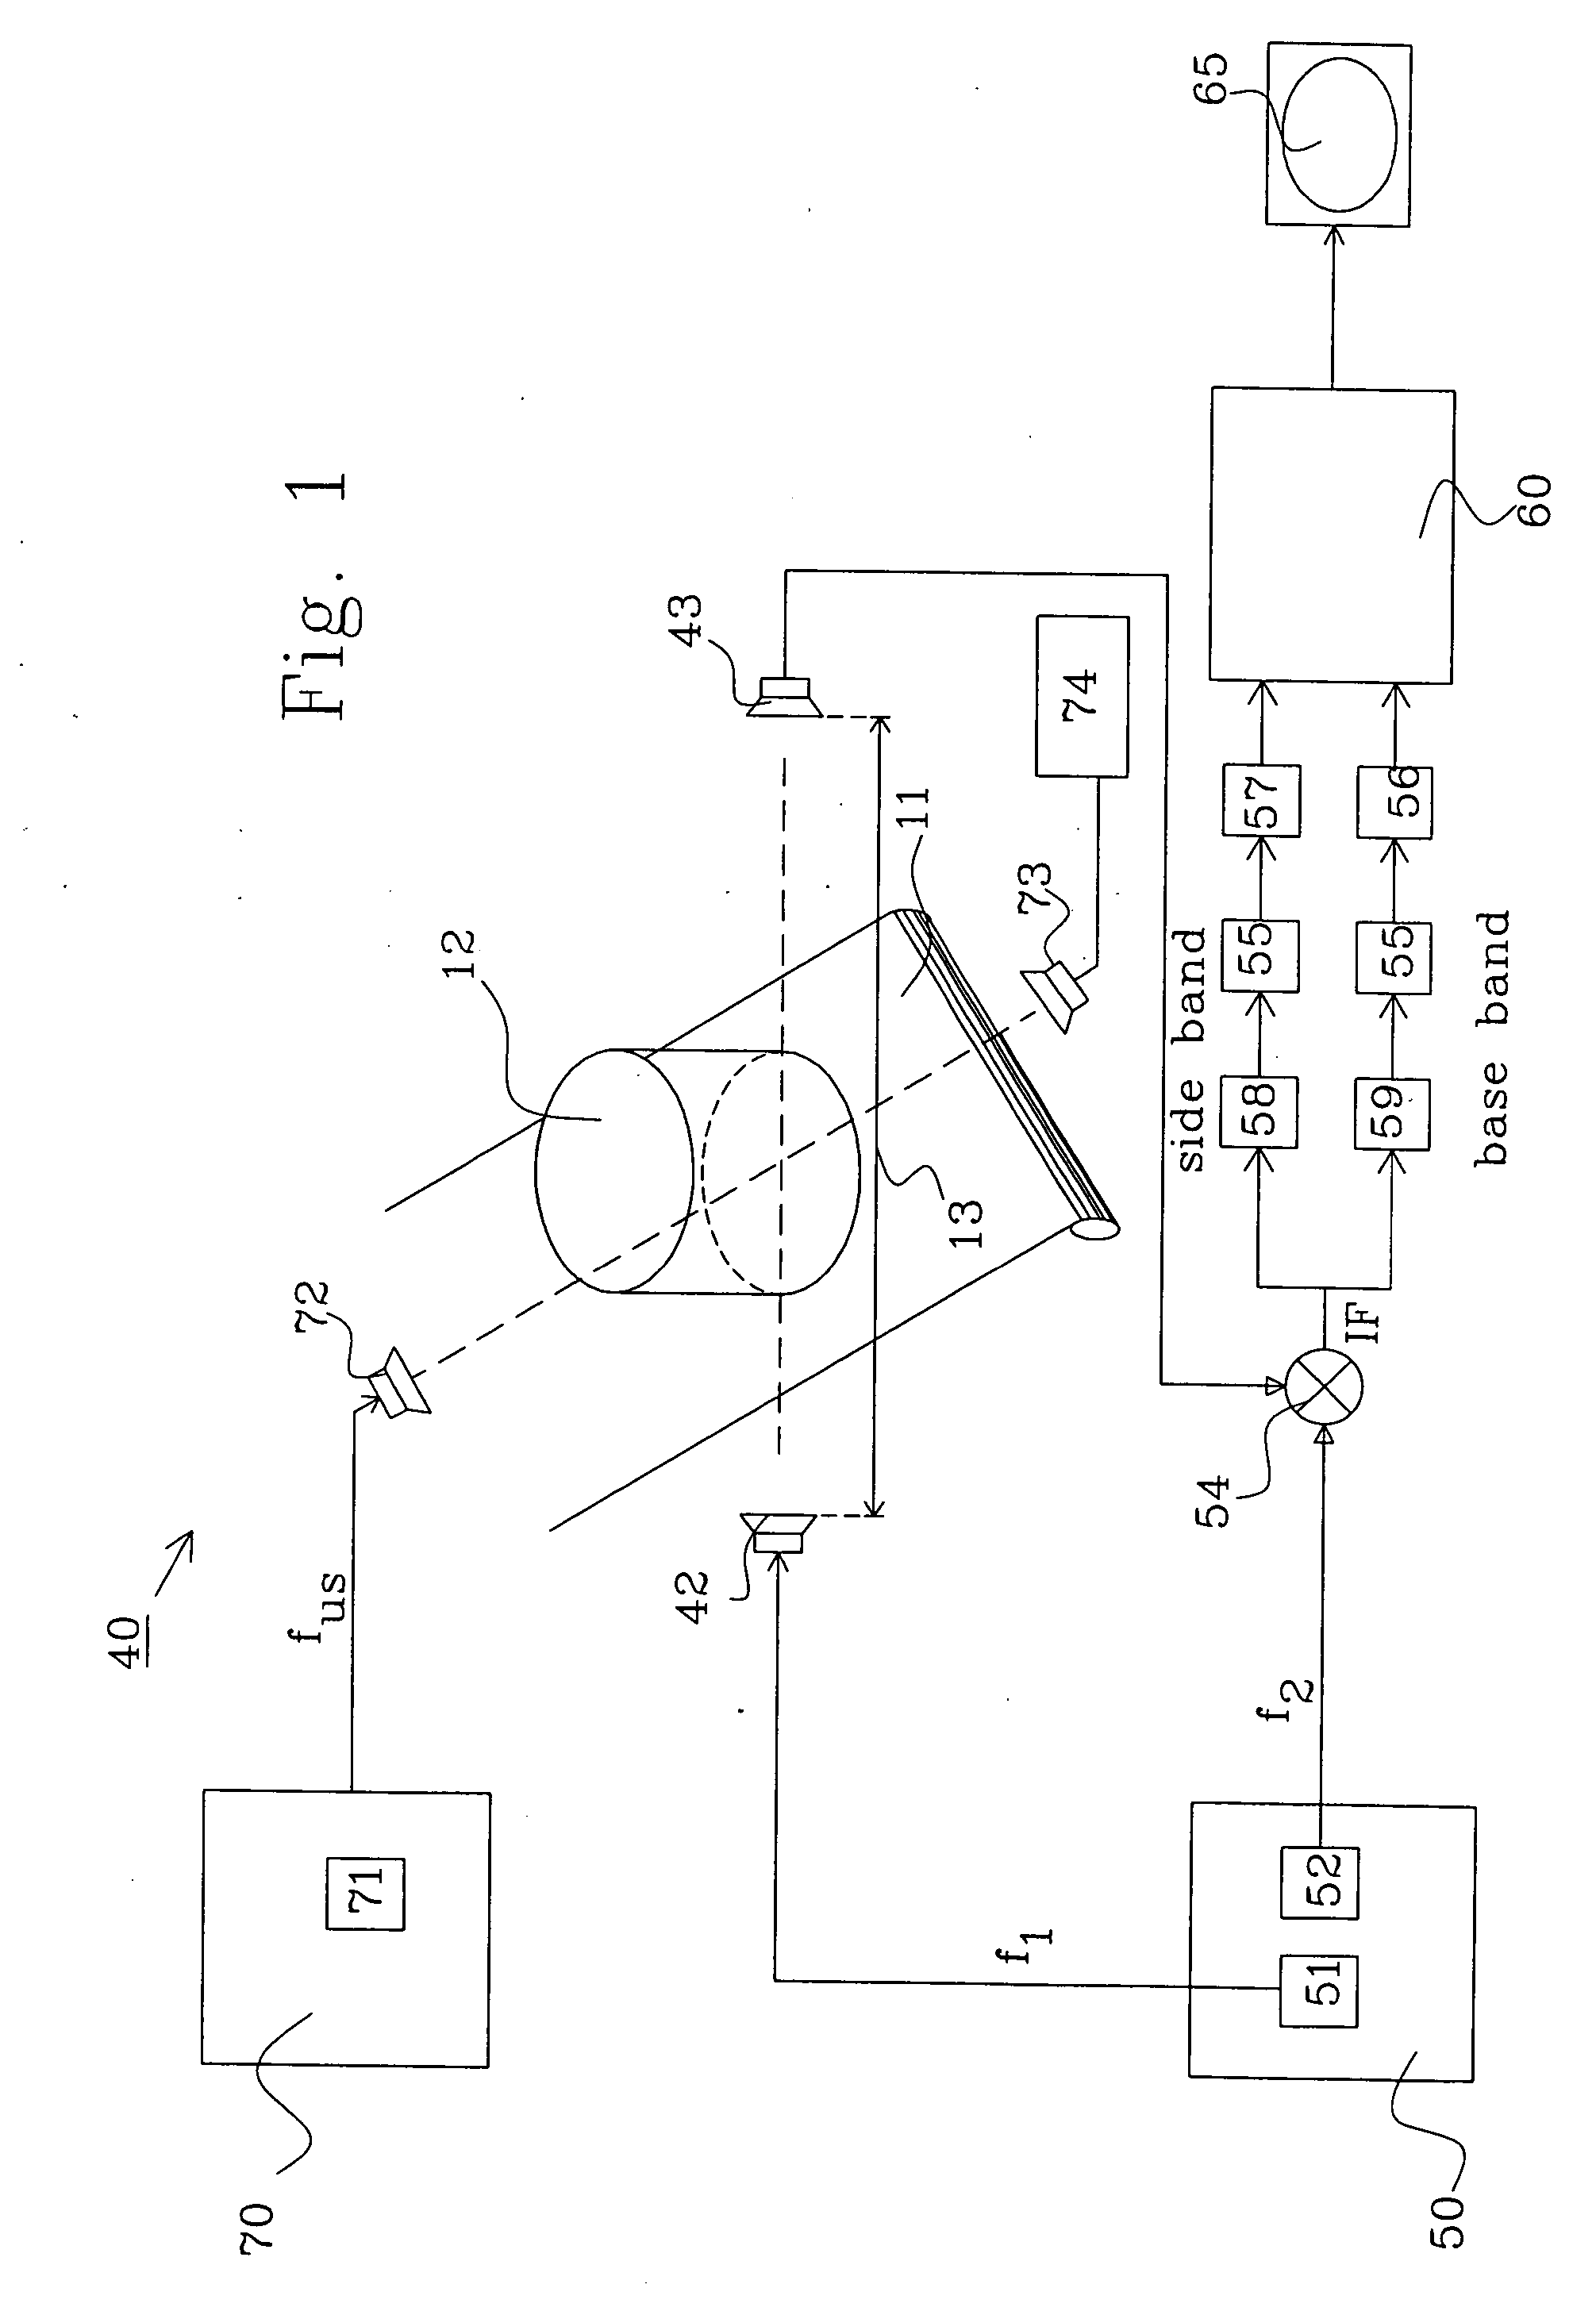 Apparatus for determining physical parameters in an object using simultaneous microwave and ultrasound radiation and measurement